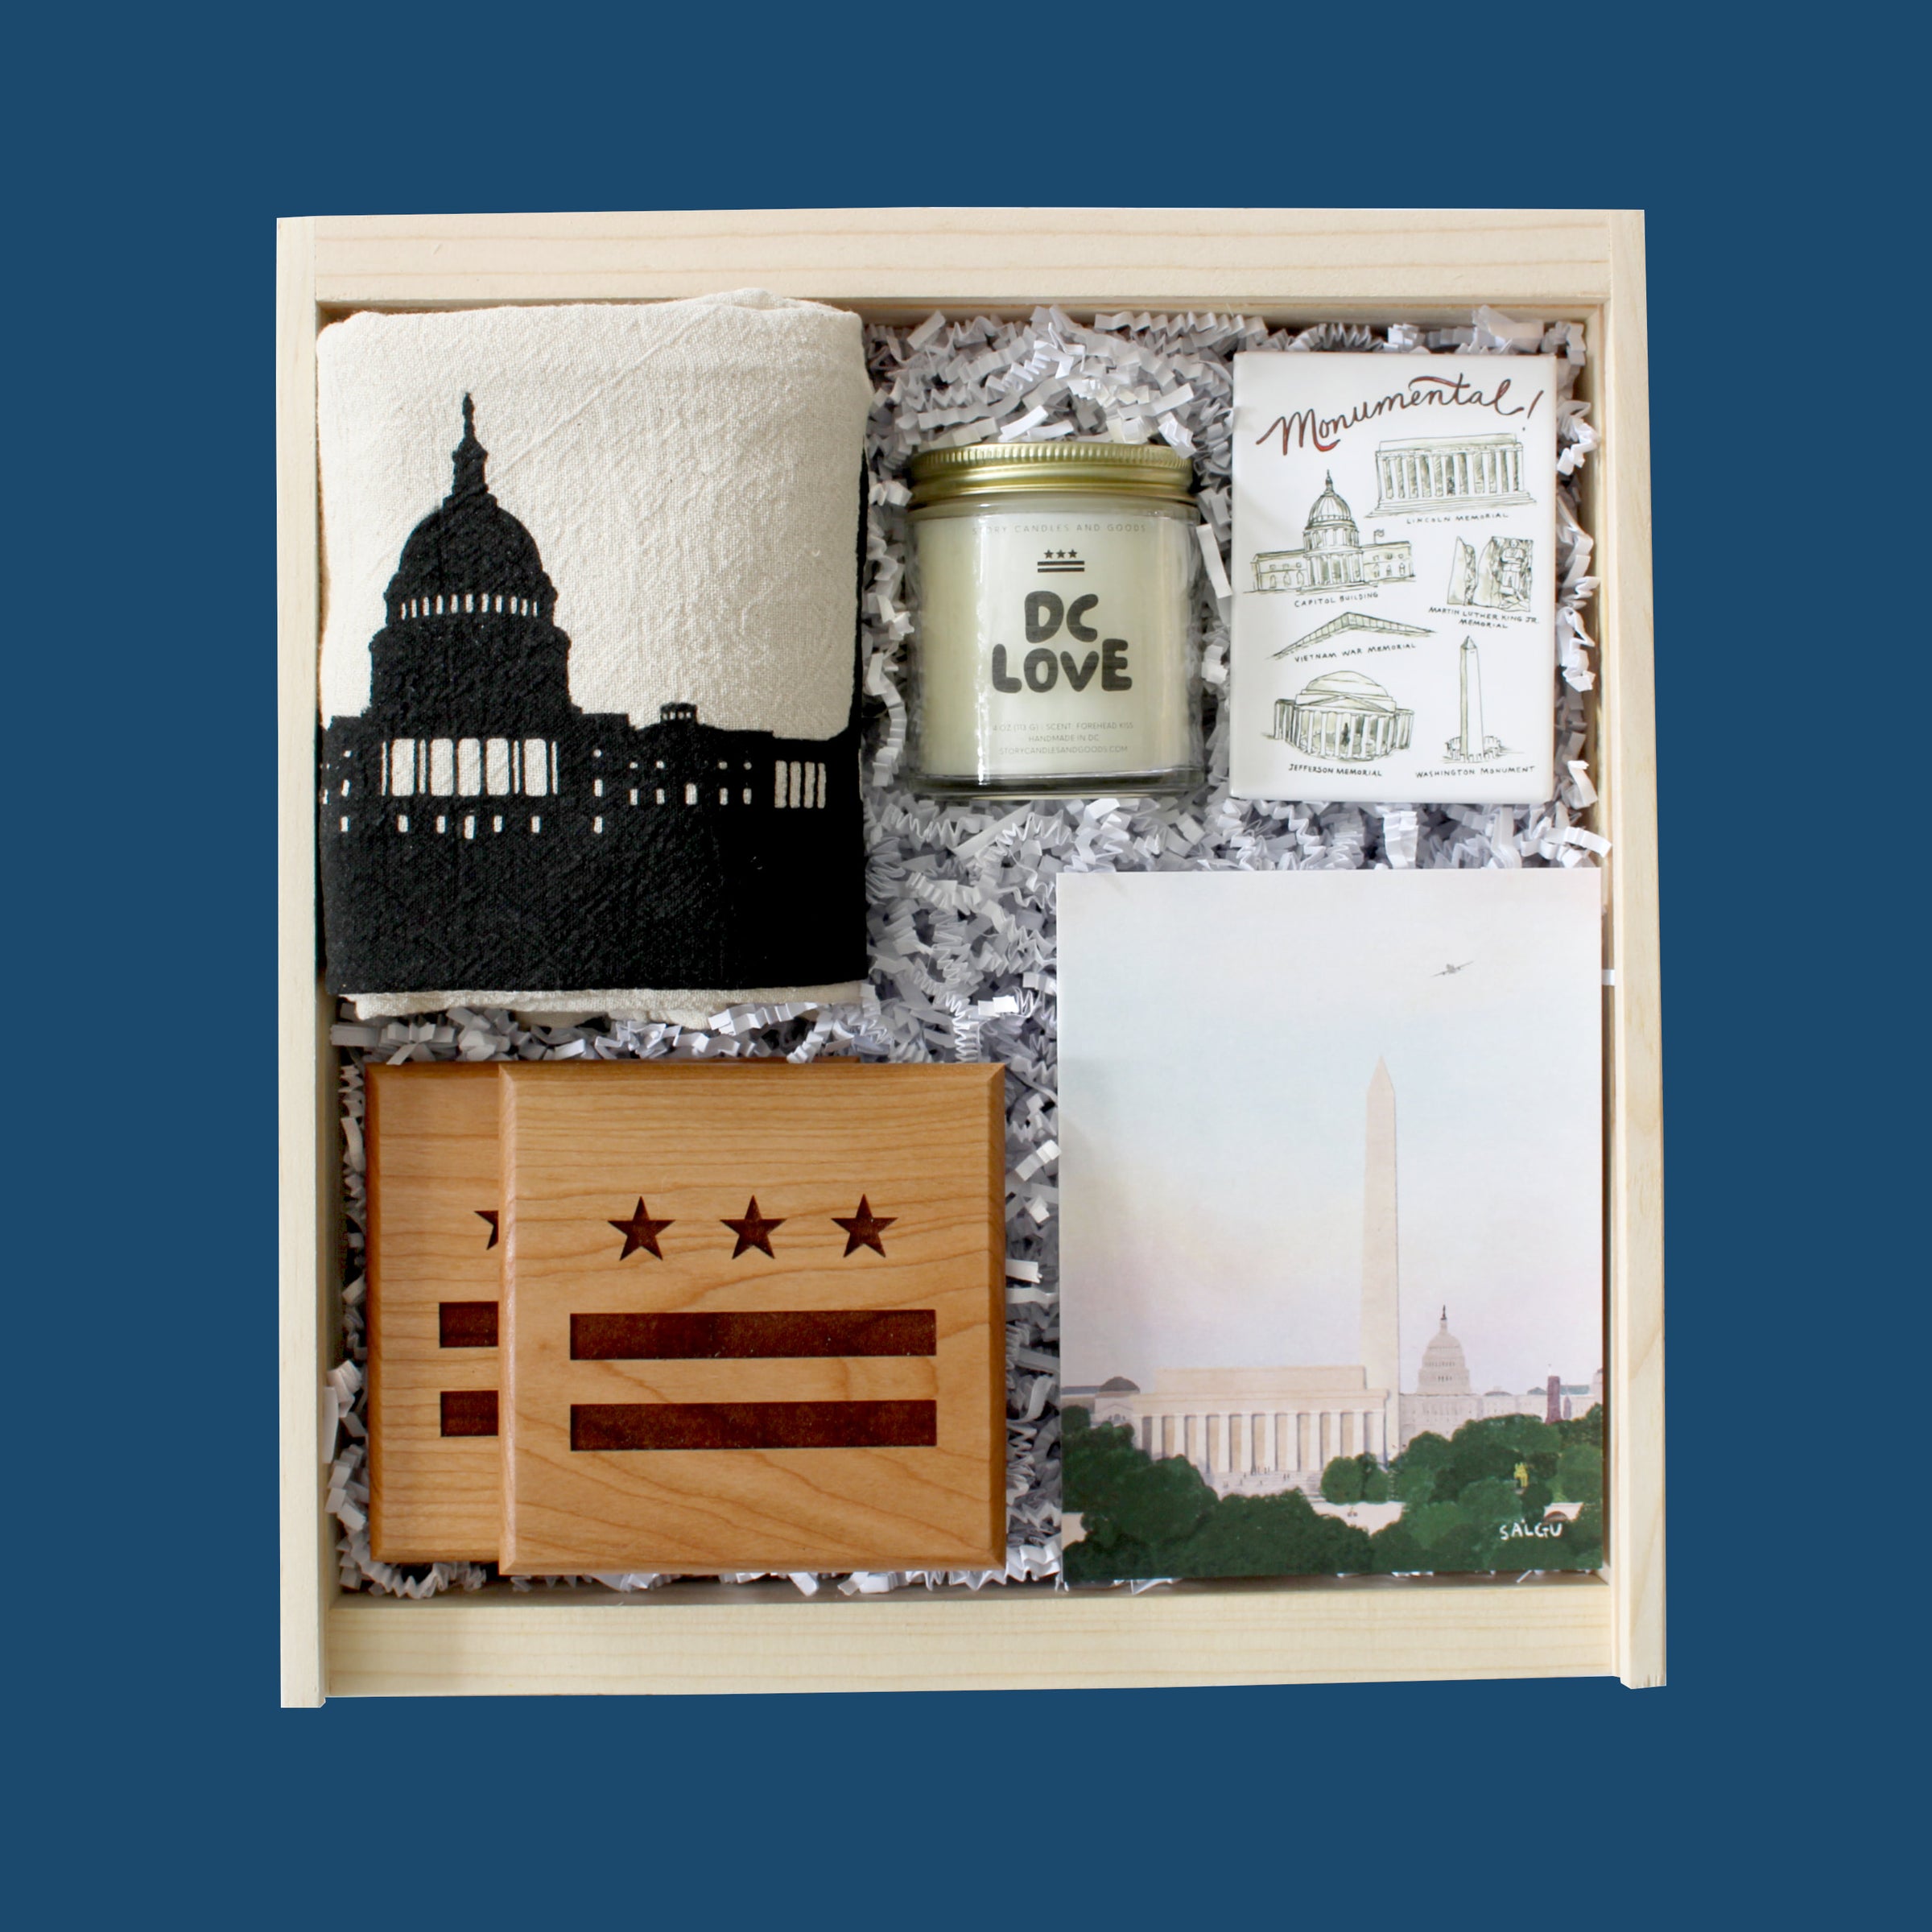 Shop Local: Where to Find Unique Gifts in Washington, DC